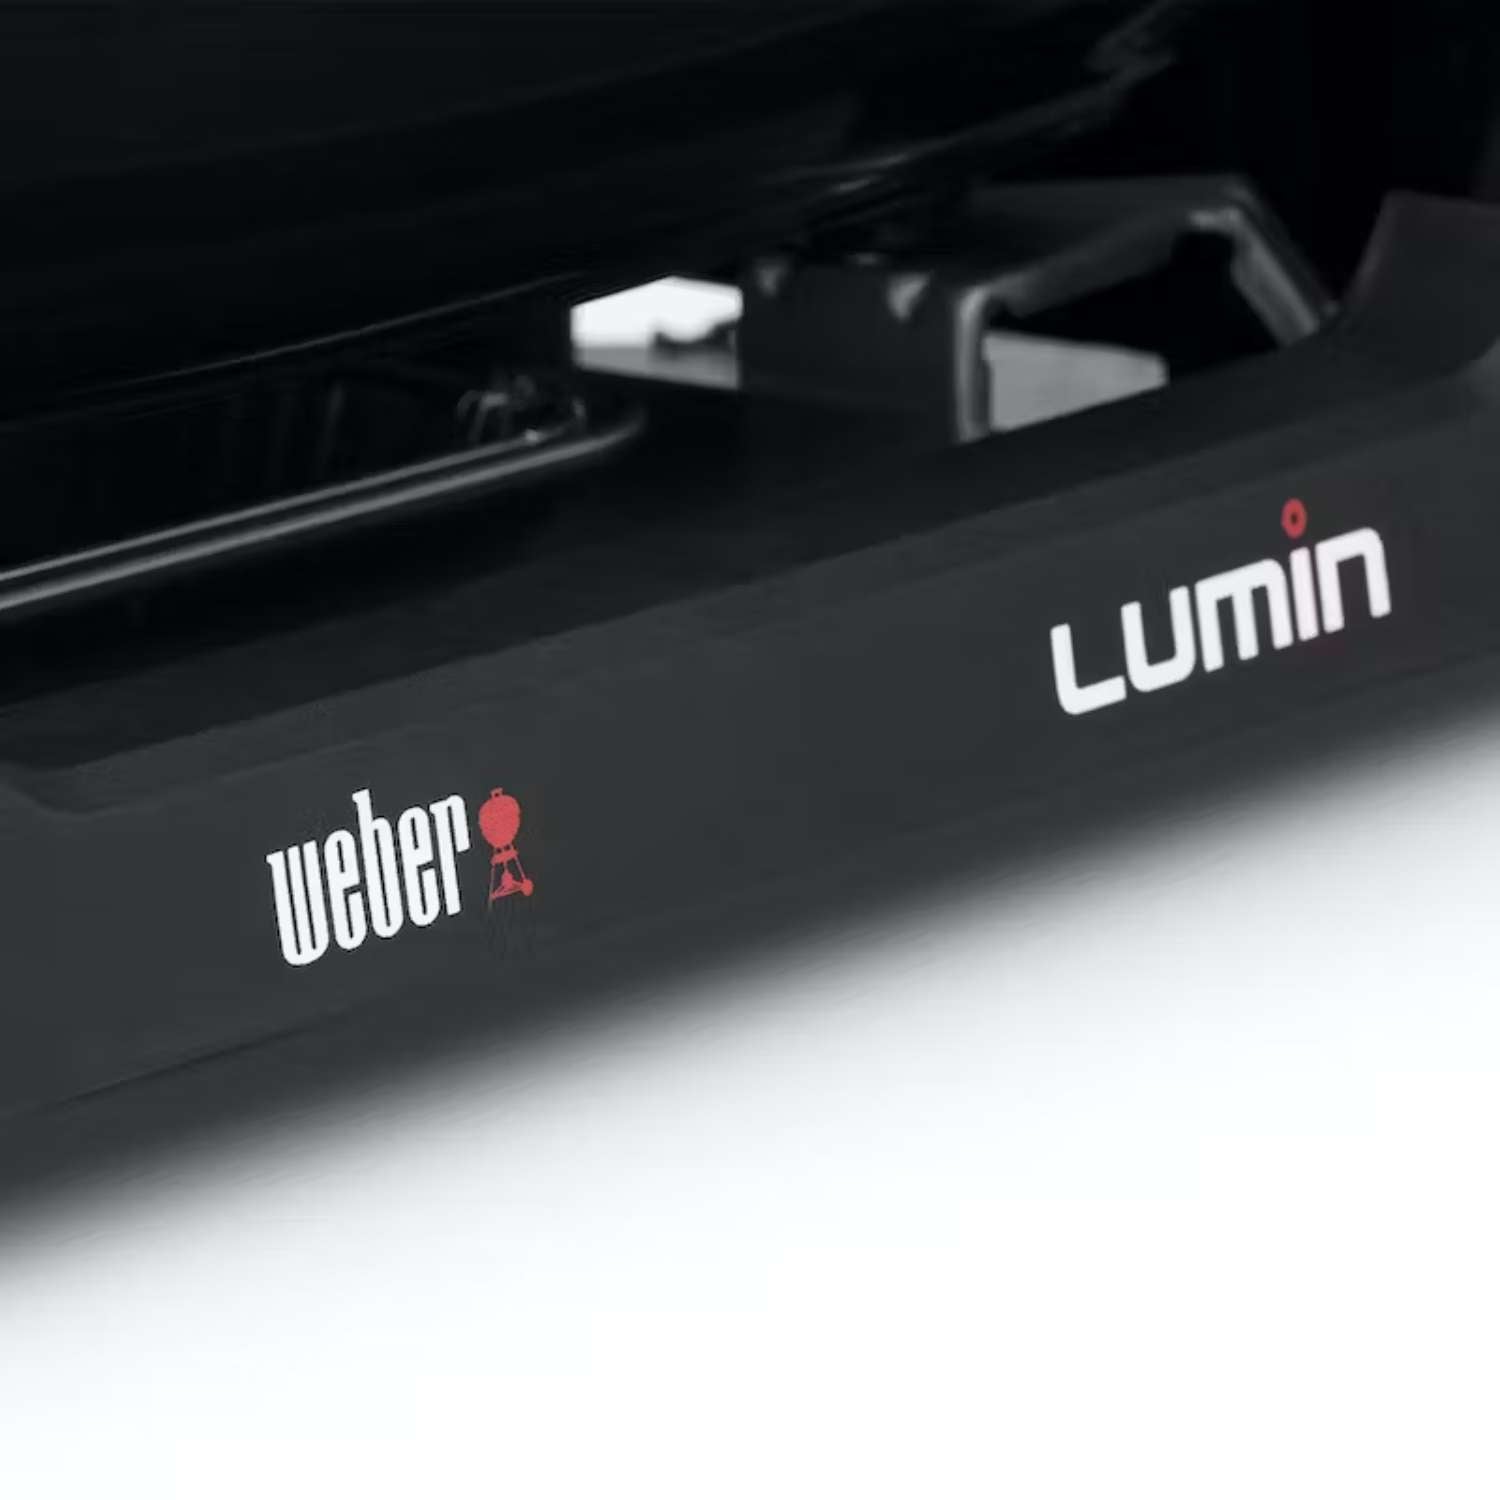 Weber Lumin Compact Grill perfect for outdoor barbecues available at MeatKing.hk1